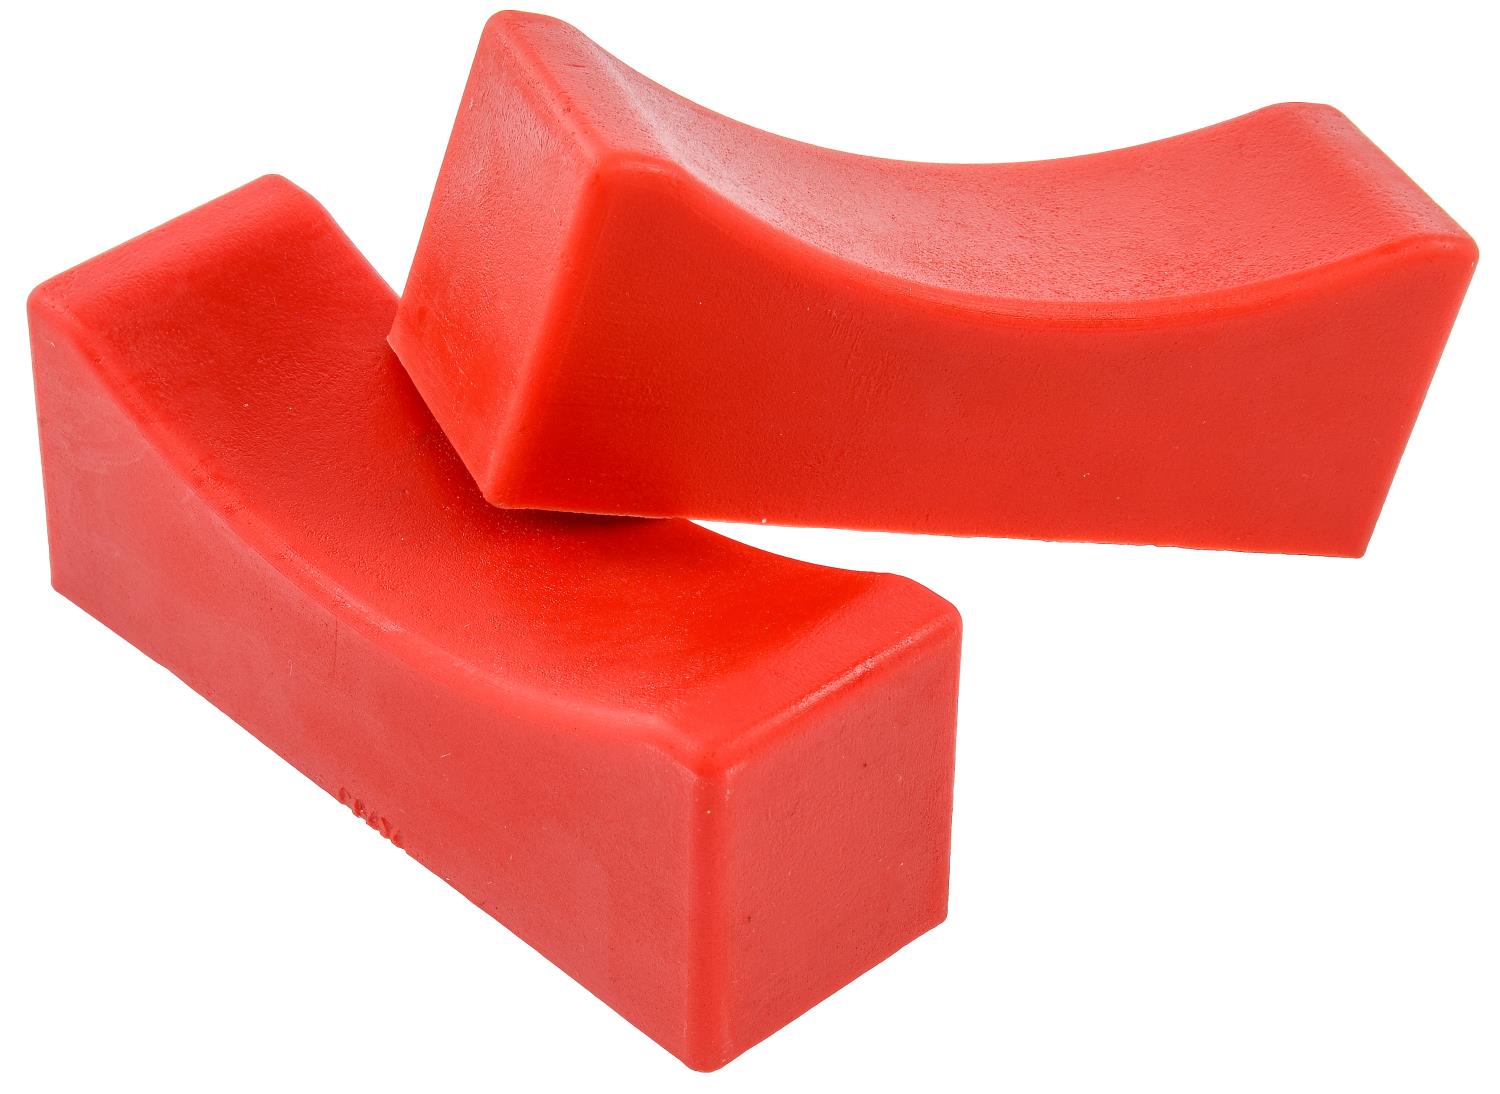 Jack Stand Pads Fits up to 1-1/4" x 4-1/2" heads